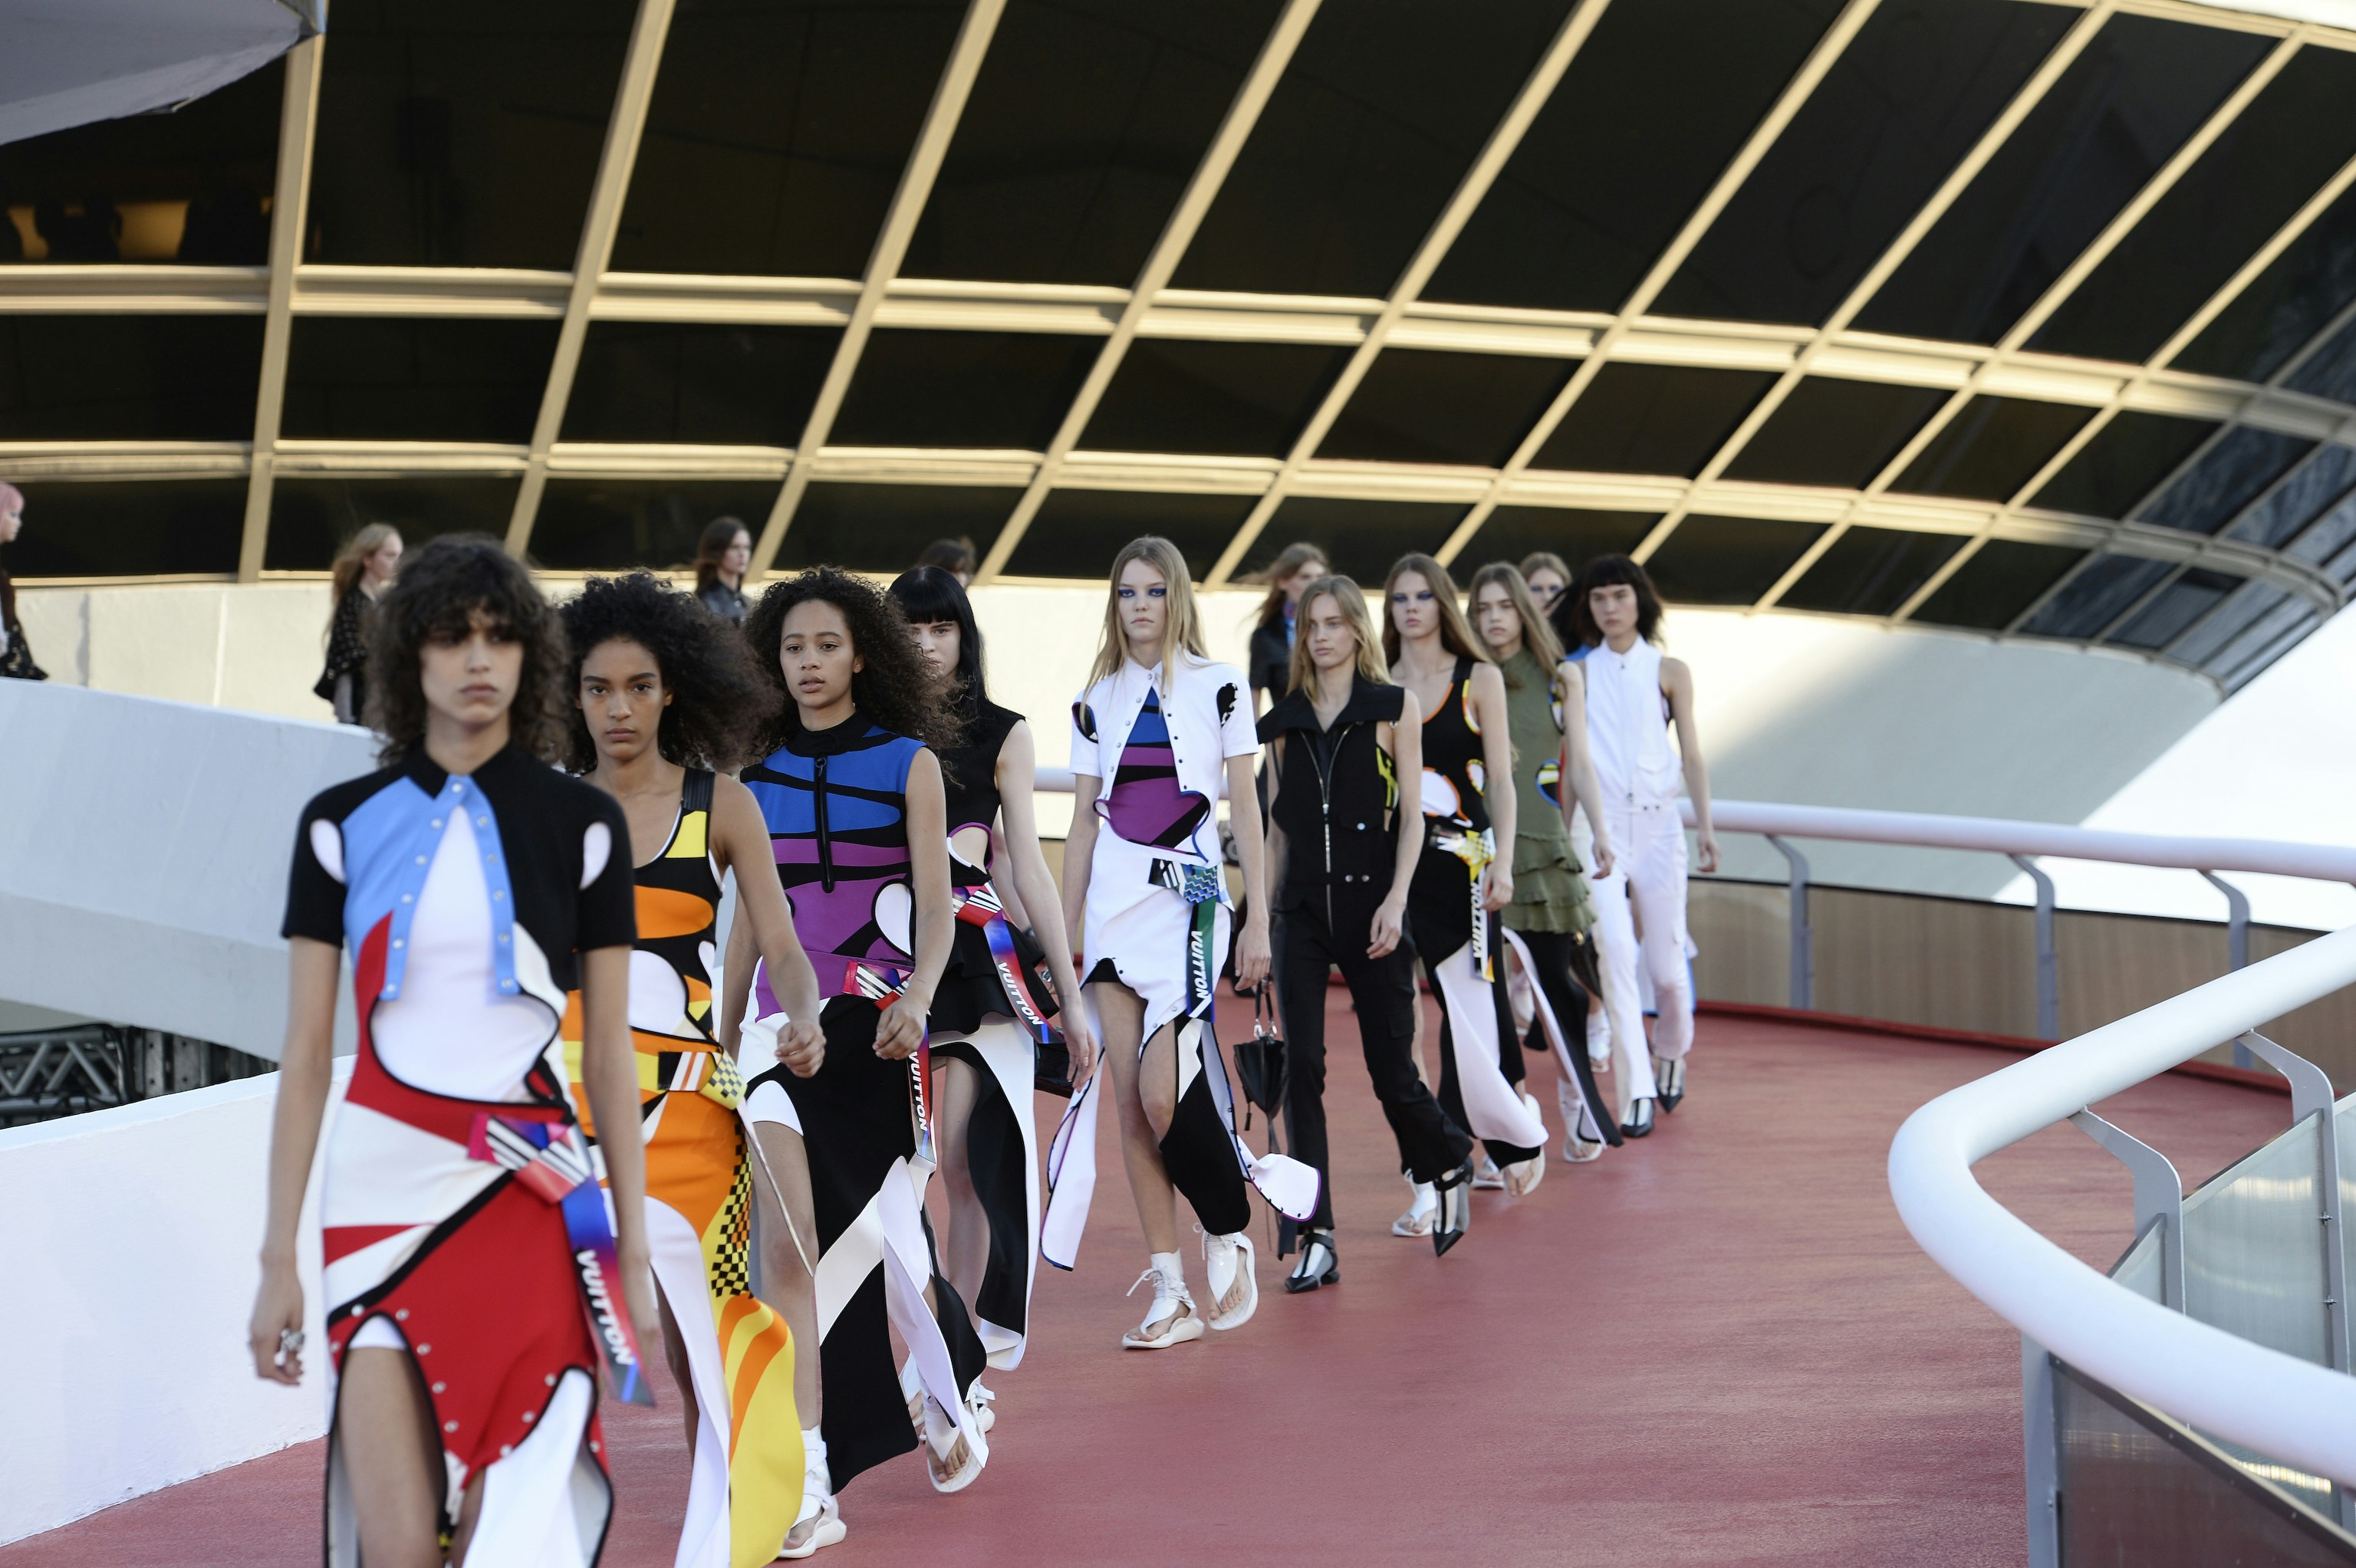 Louis Vuitton Cruise in Rio: The After-Party